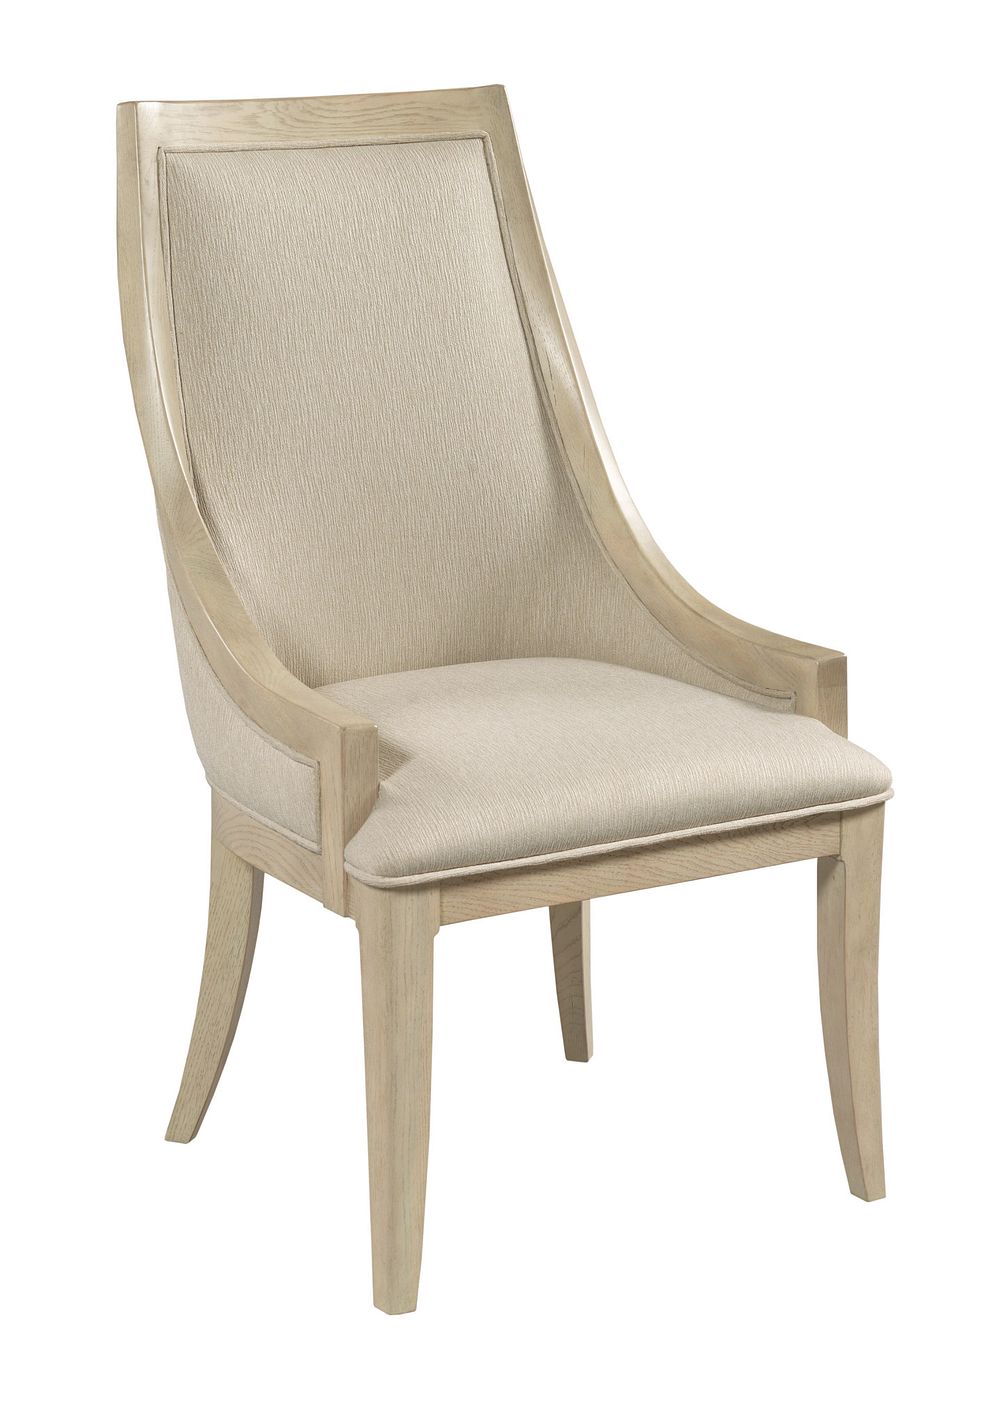 CHALON UPHOLSTERED DINING CHAIR